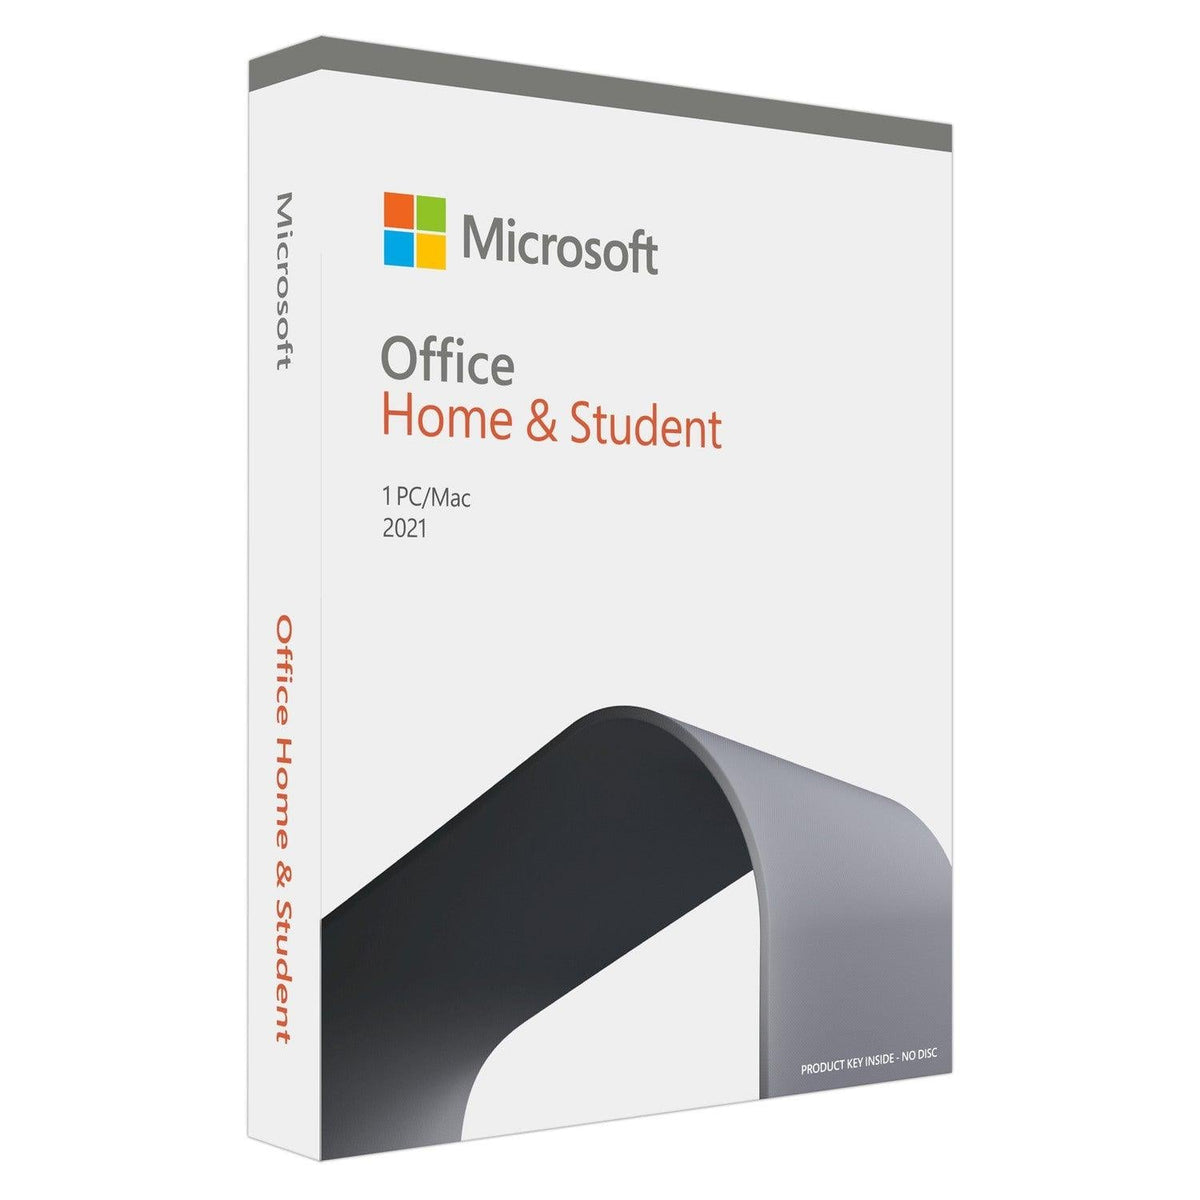 Microsoft Office 2021 Home &amp; Student Software License | 79G-05388 (7500108726460)